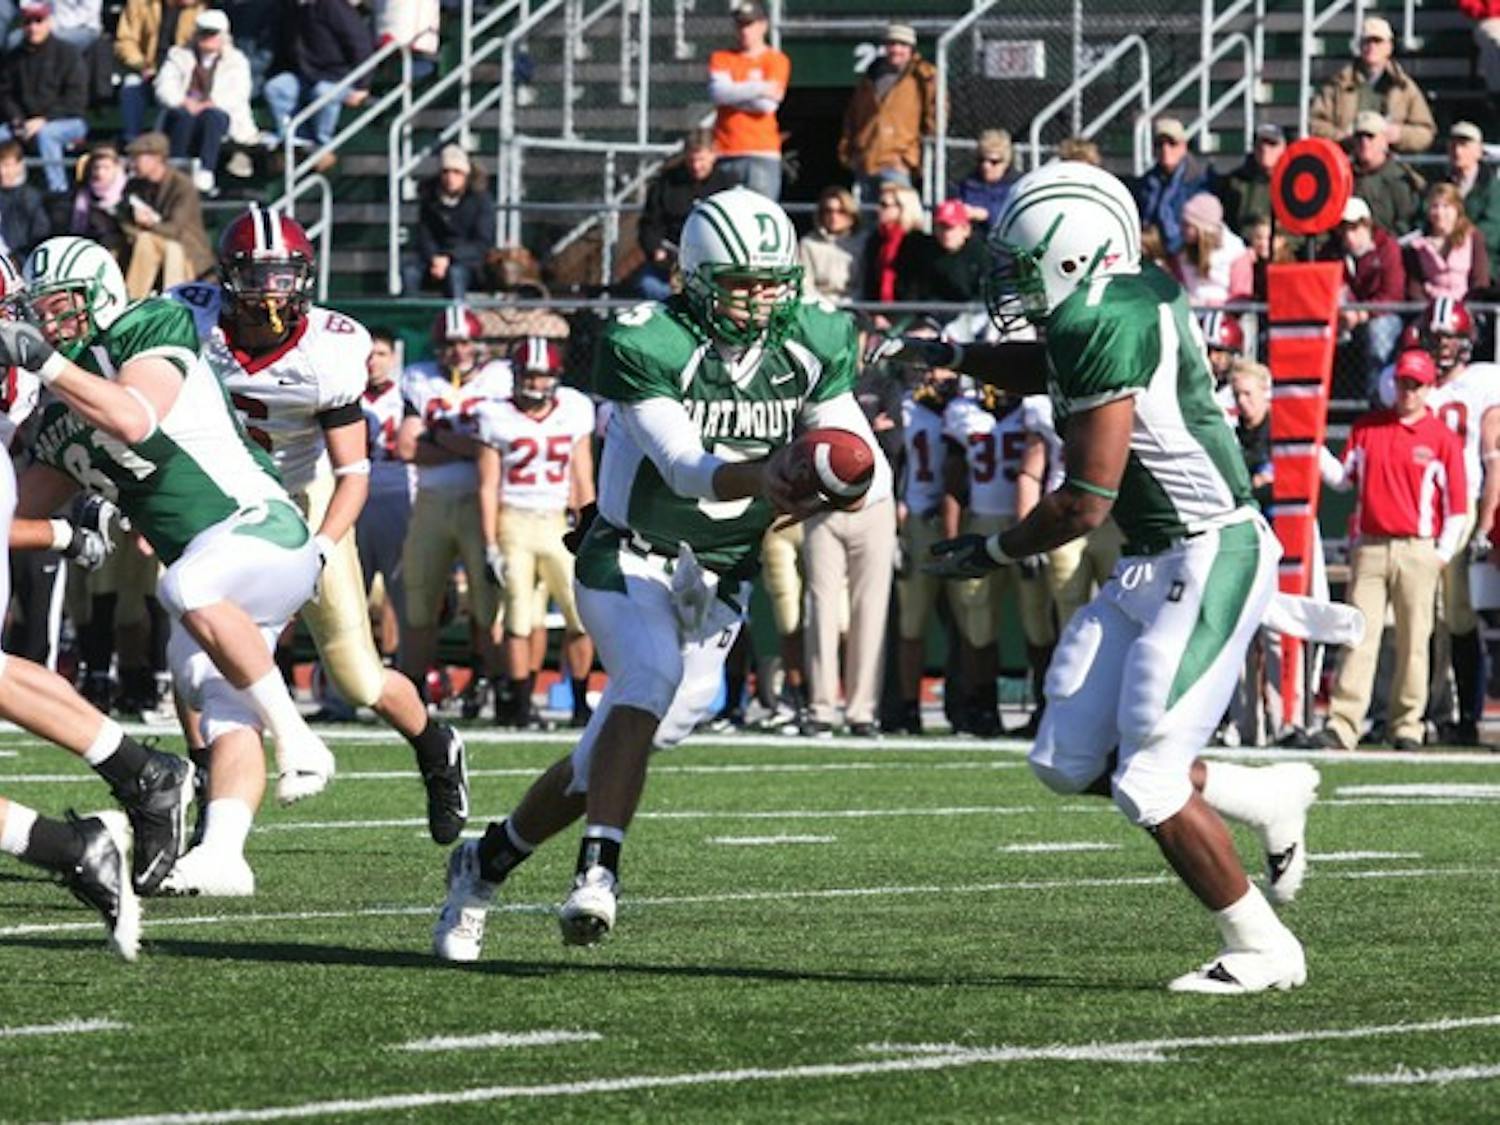 Princeton gained 343 rushing yards while Dartmouth stumbled to -11 yards on the ground in Saturday's 28-10 loss.